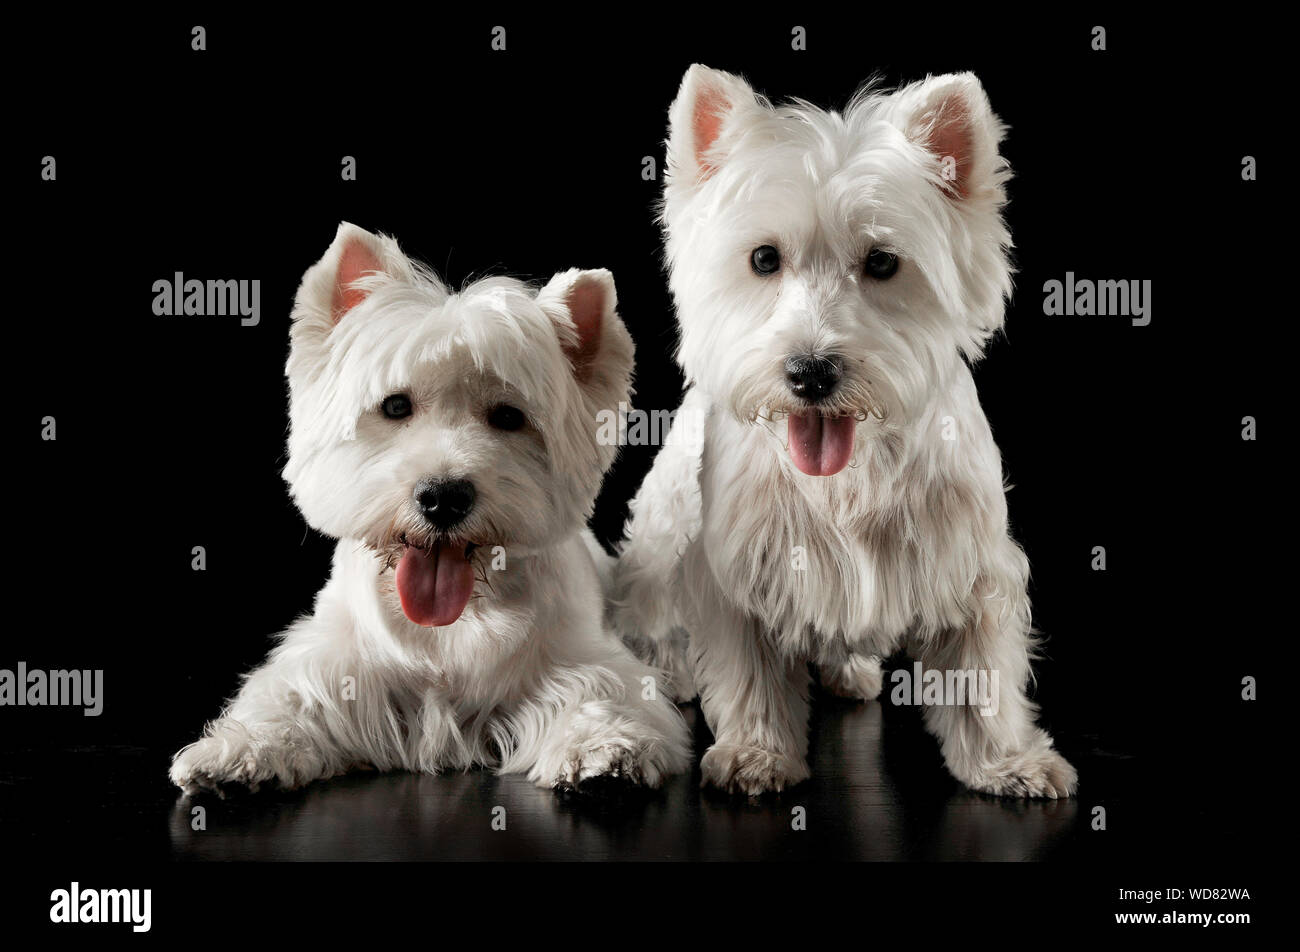 Close-up Portrait Of Puppies Sticking Out Tongues Against Black Color Stock Photo